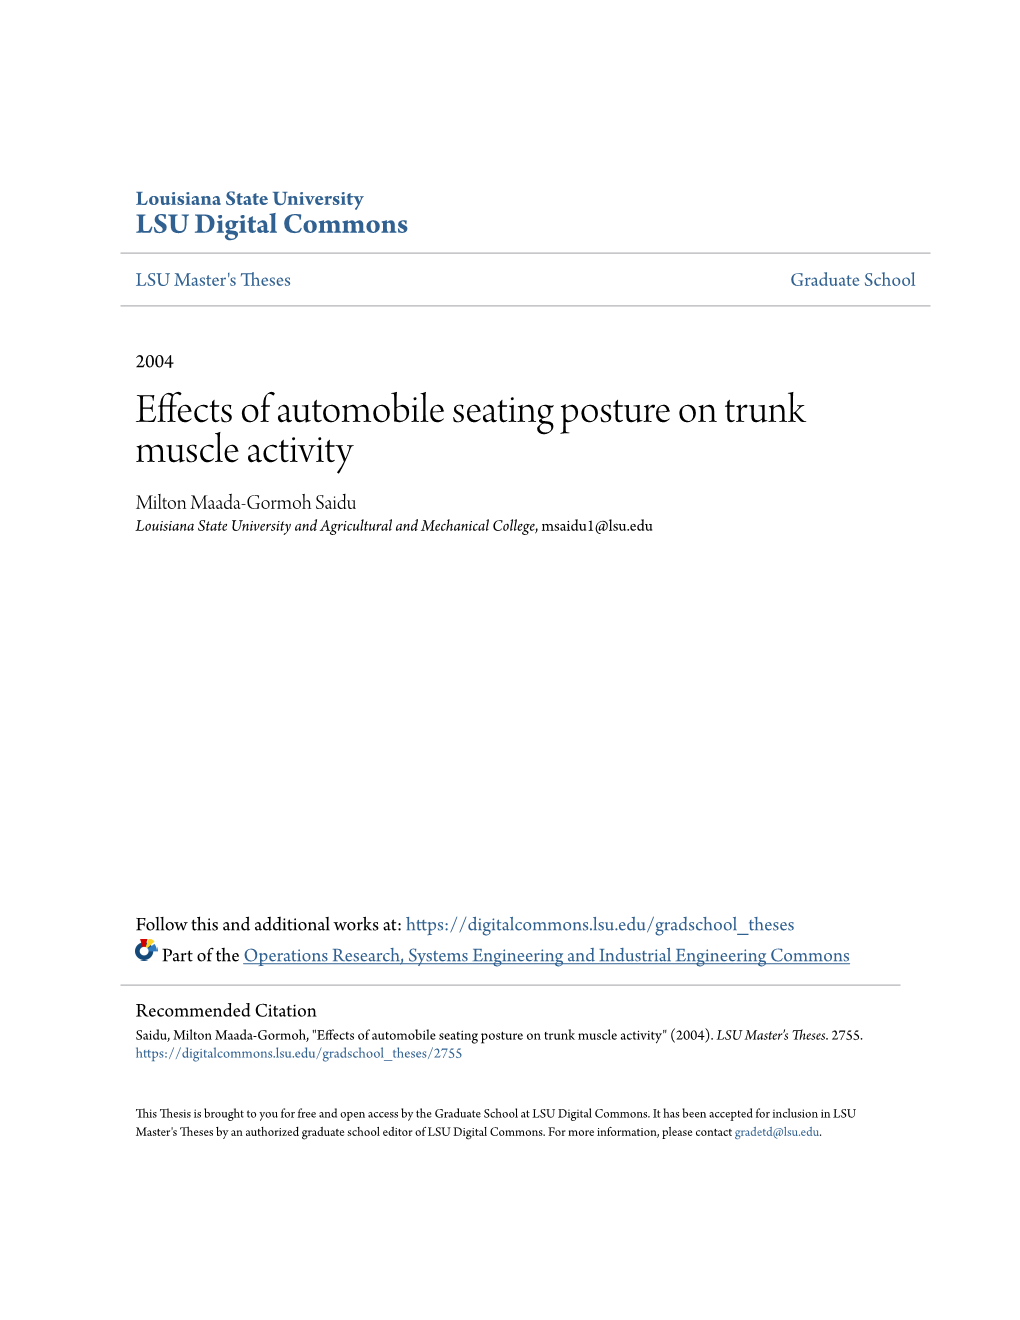 Effects of Automobile Seating Posture on Trunk Muscle Activity